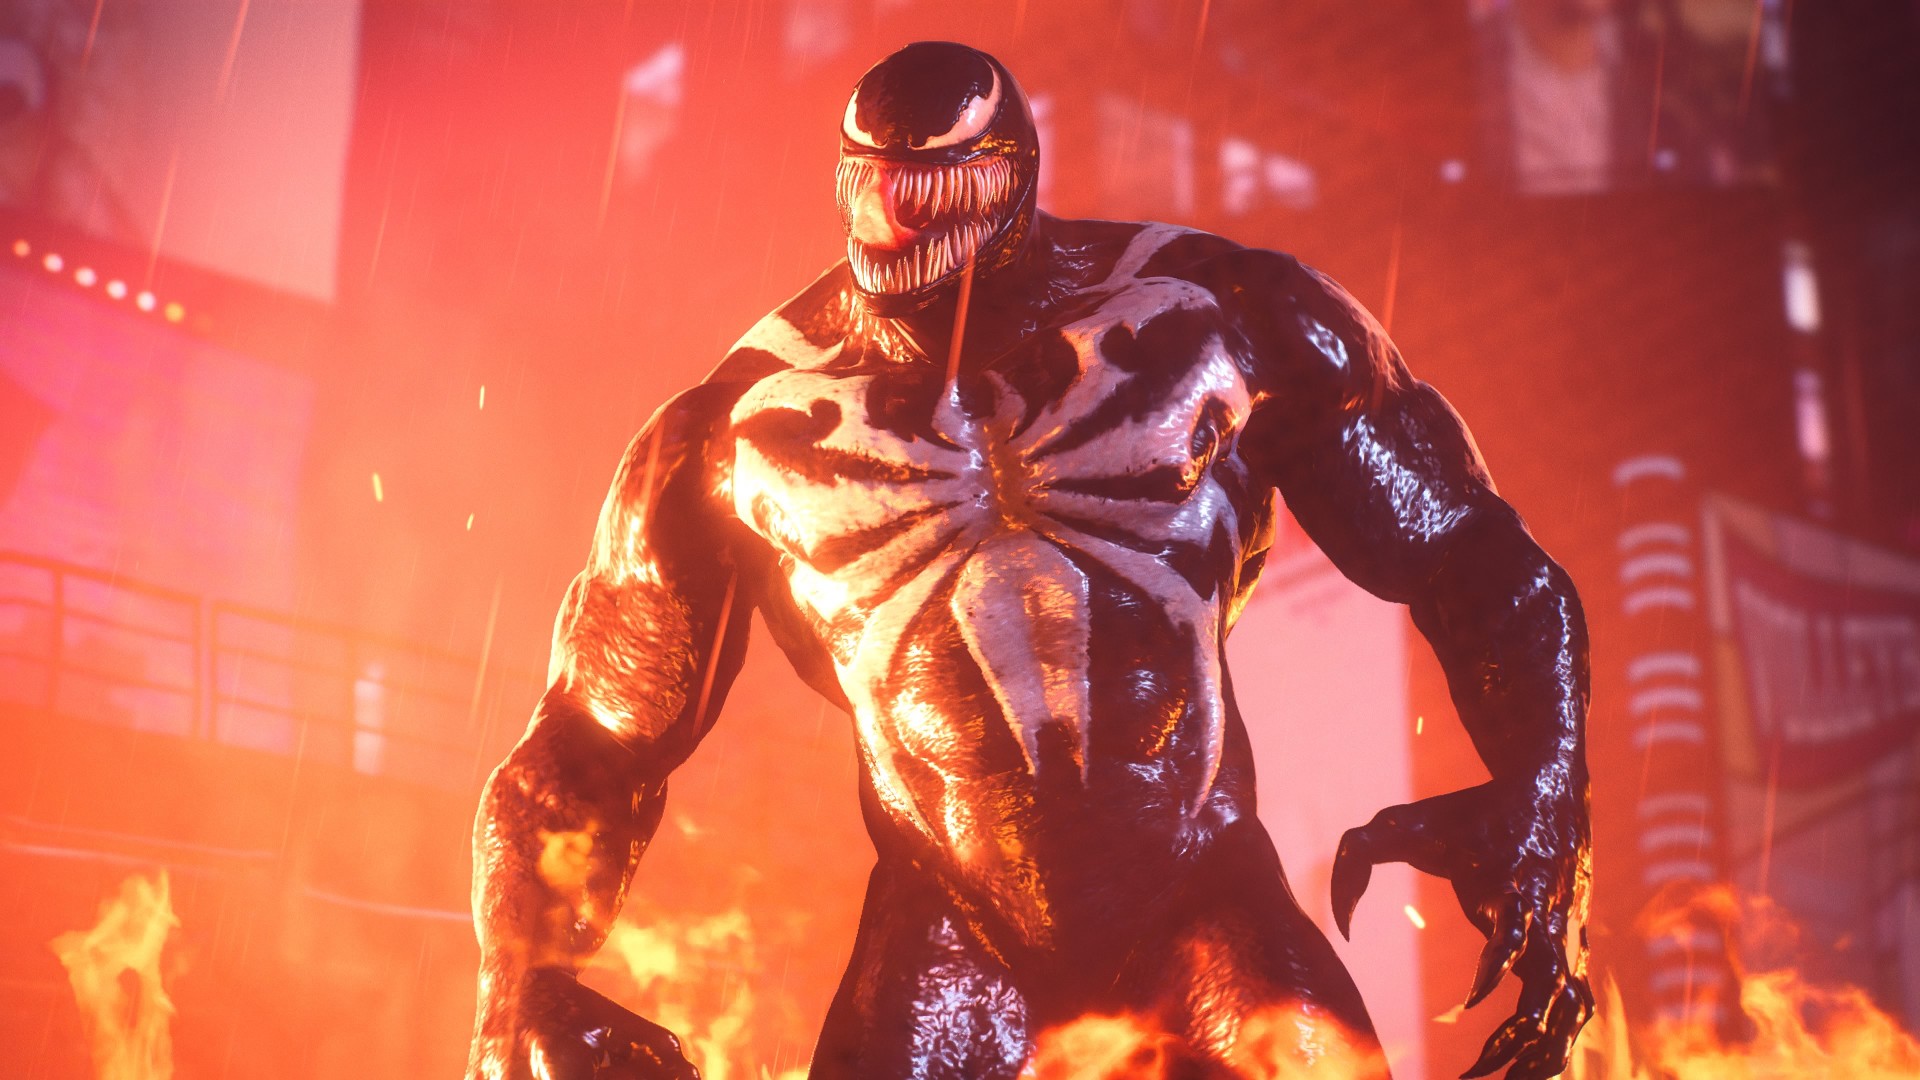 Marvel's spider-man 2: let there be carnage dlc cover art